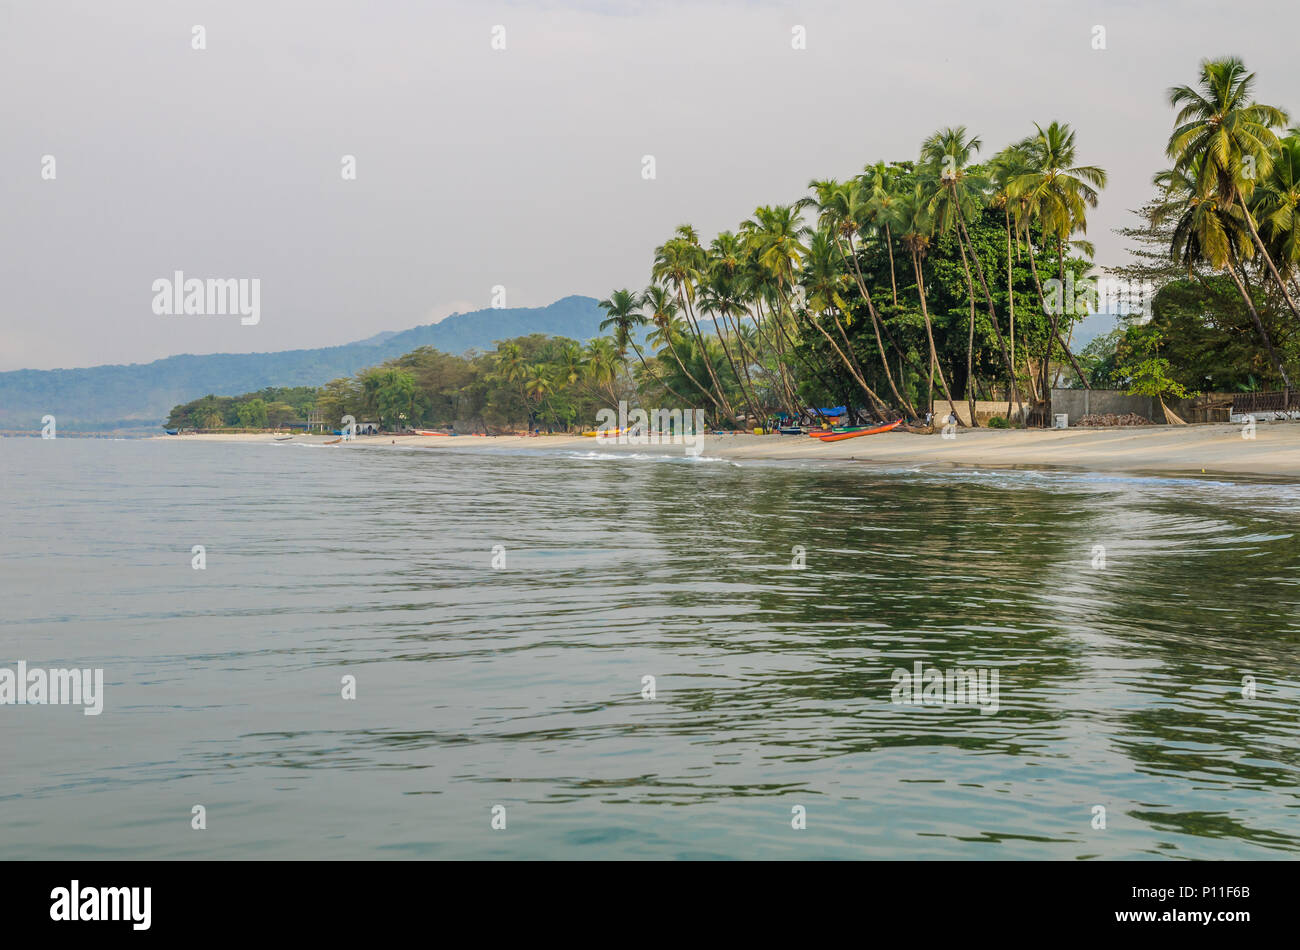 Calm water, palm trees and white sand beach at Tokeh Beach, south of Freetown, Sierra Leone, Africa Stock Photo